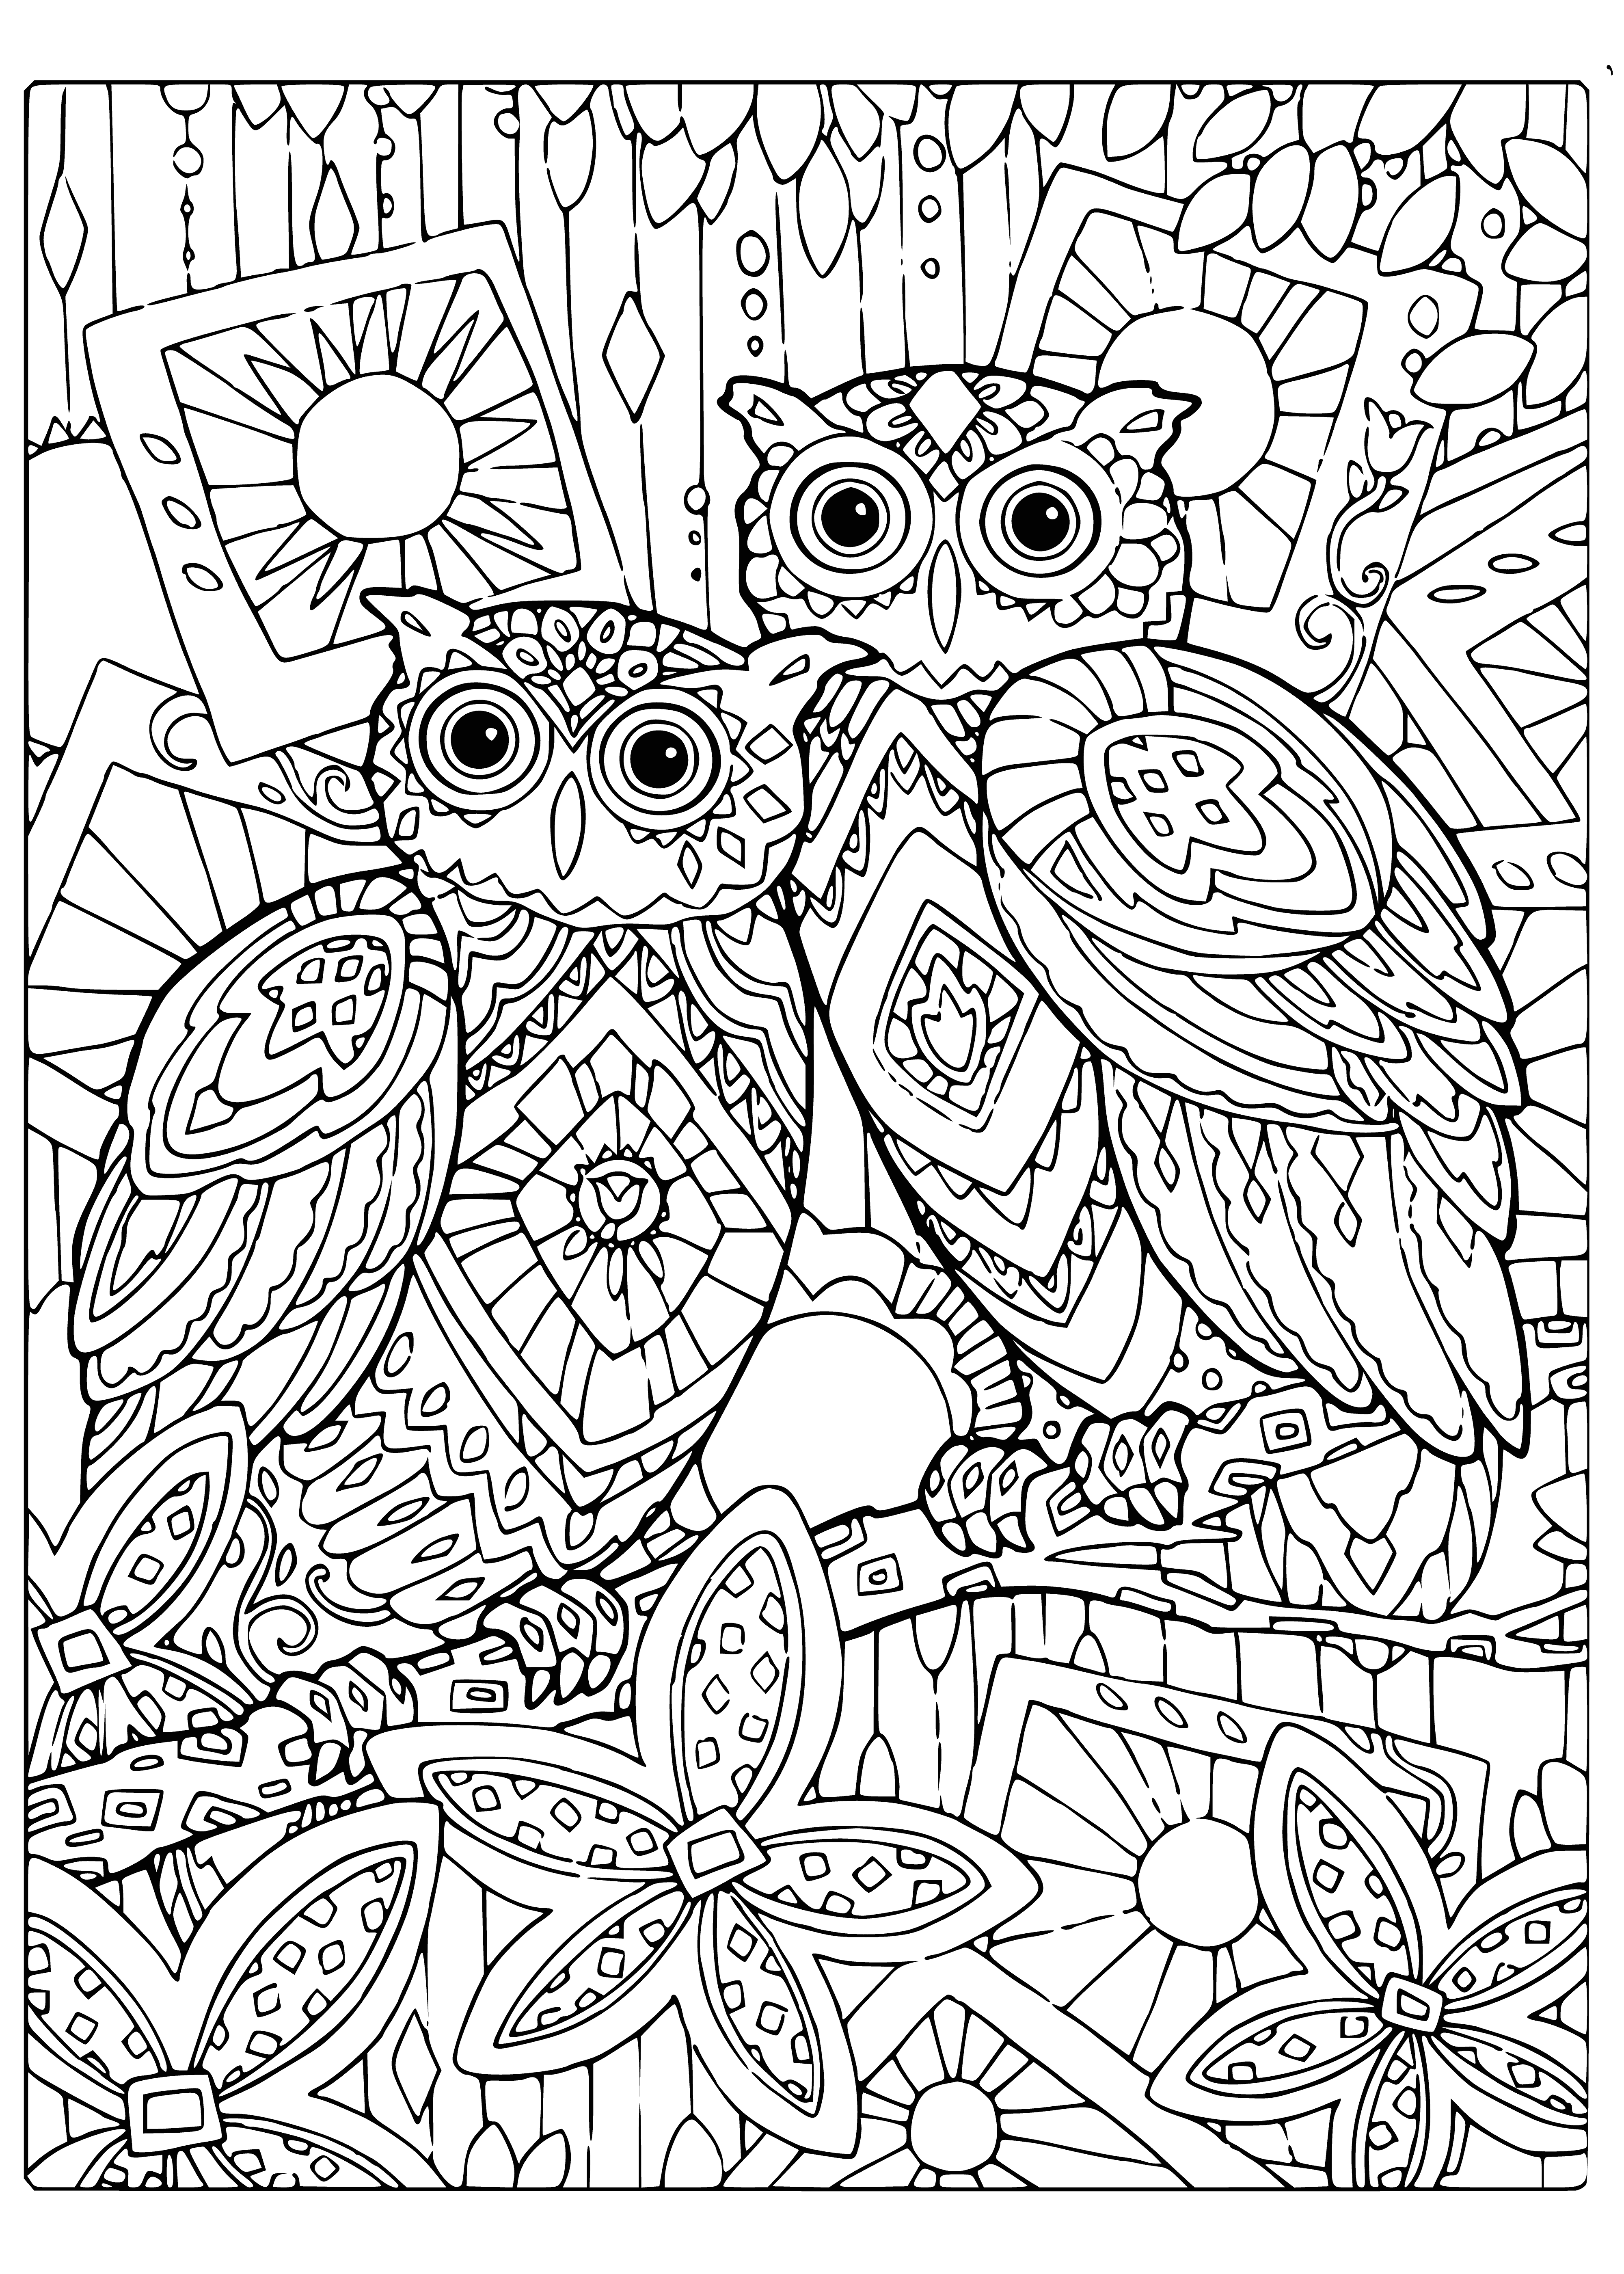 Owls on a branch coloring page